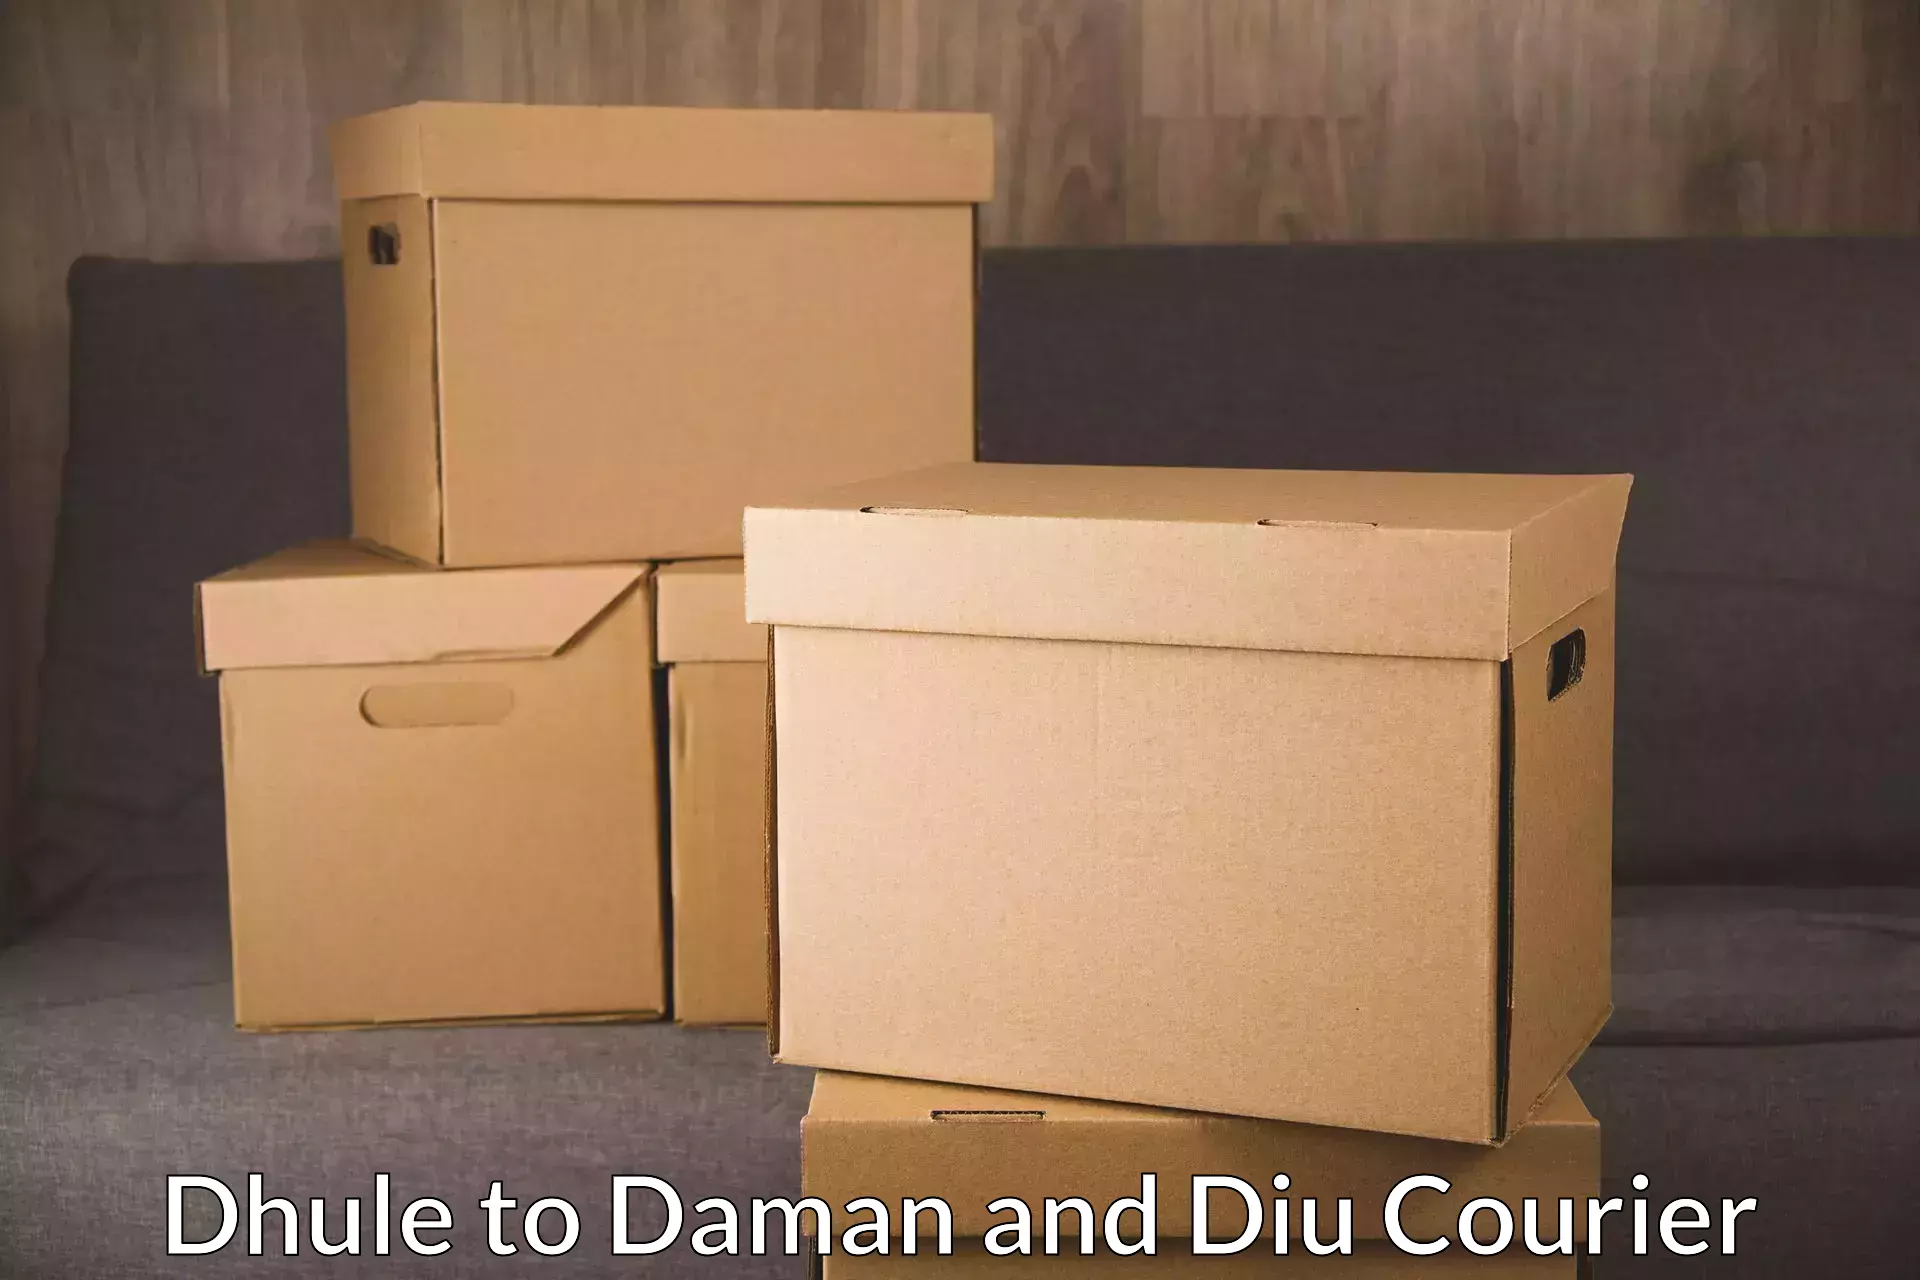 24-hour delivery options Dhule to Daman and Diu